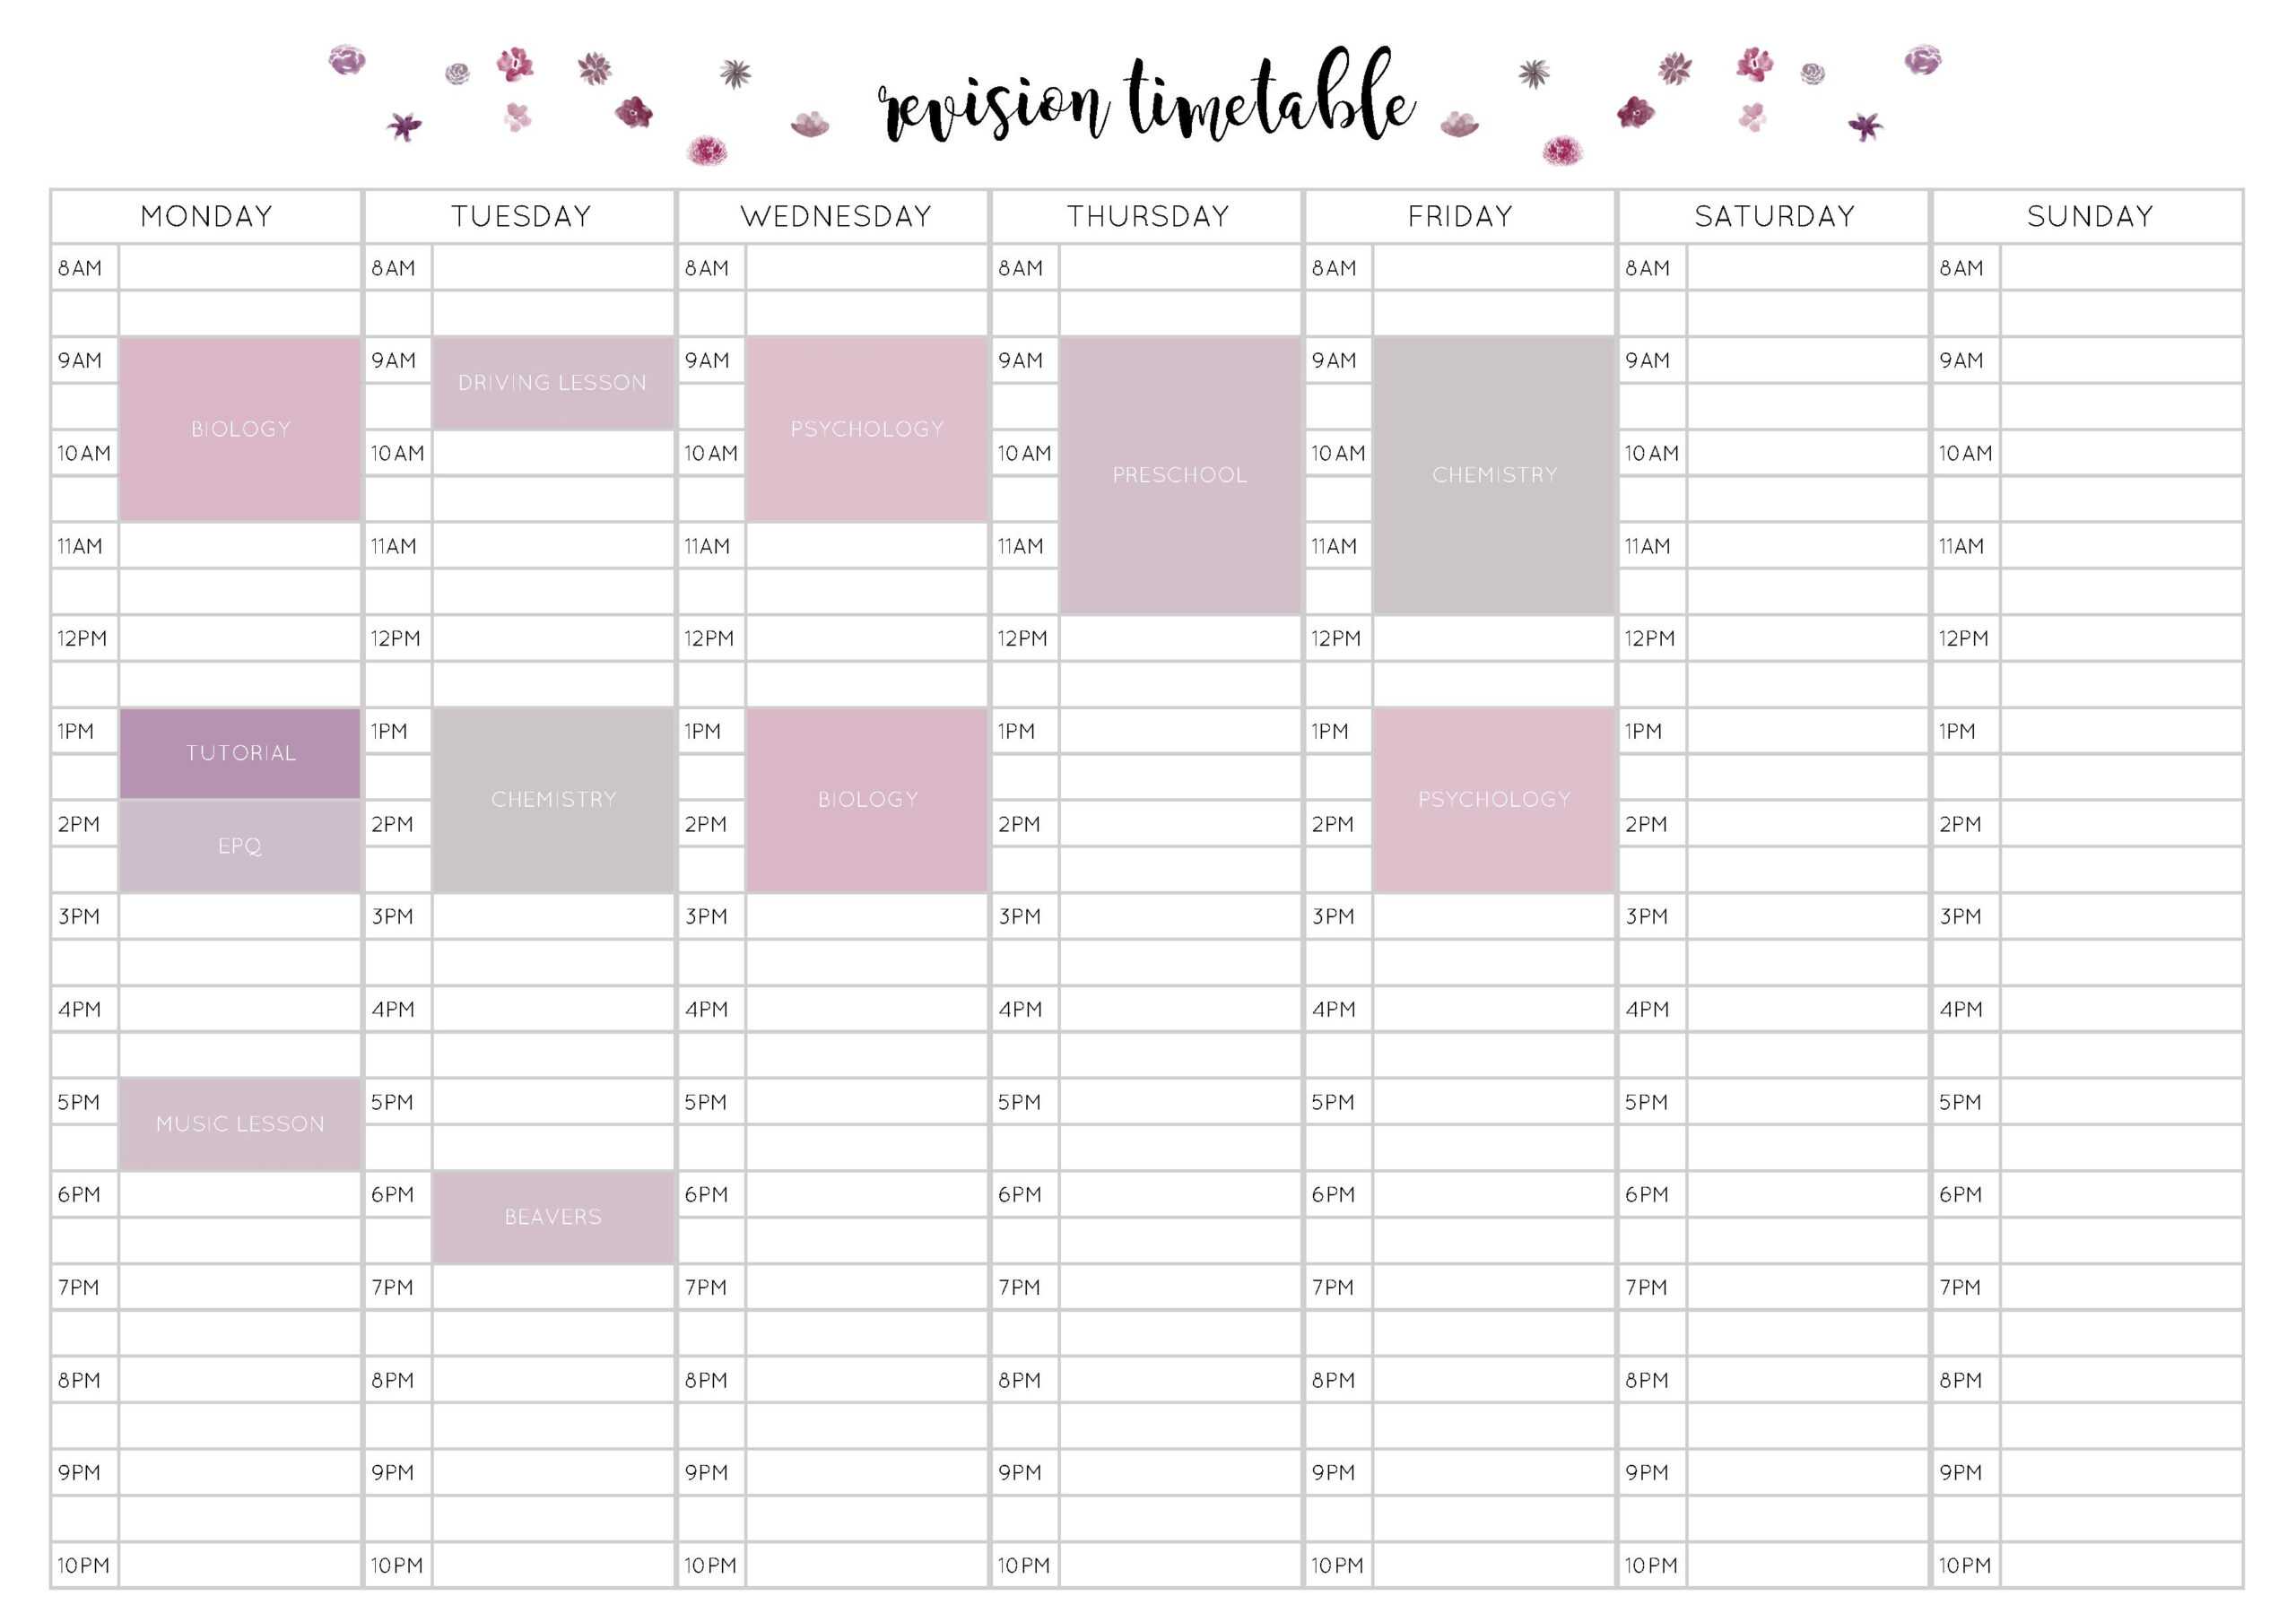 Free Revision Timetable Printable – Emily Studies Inside Blank Revision Timetable Template